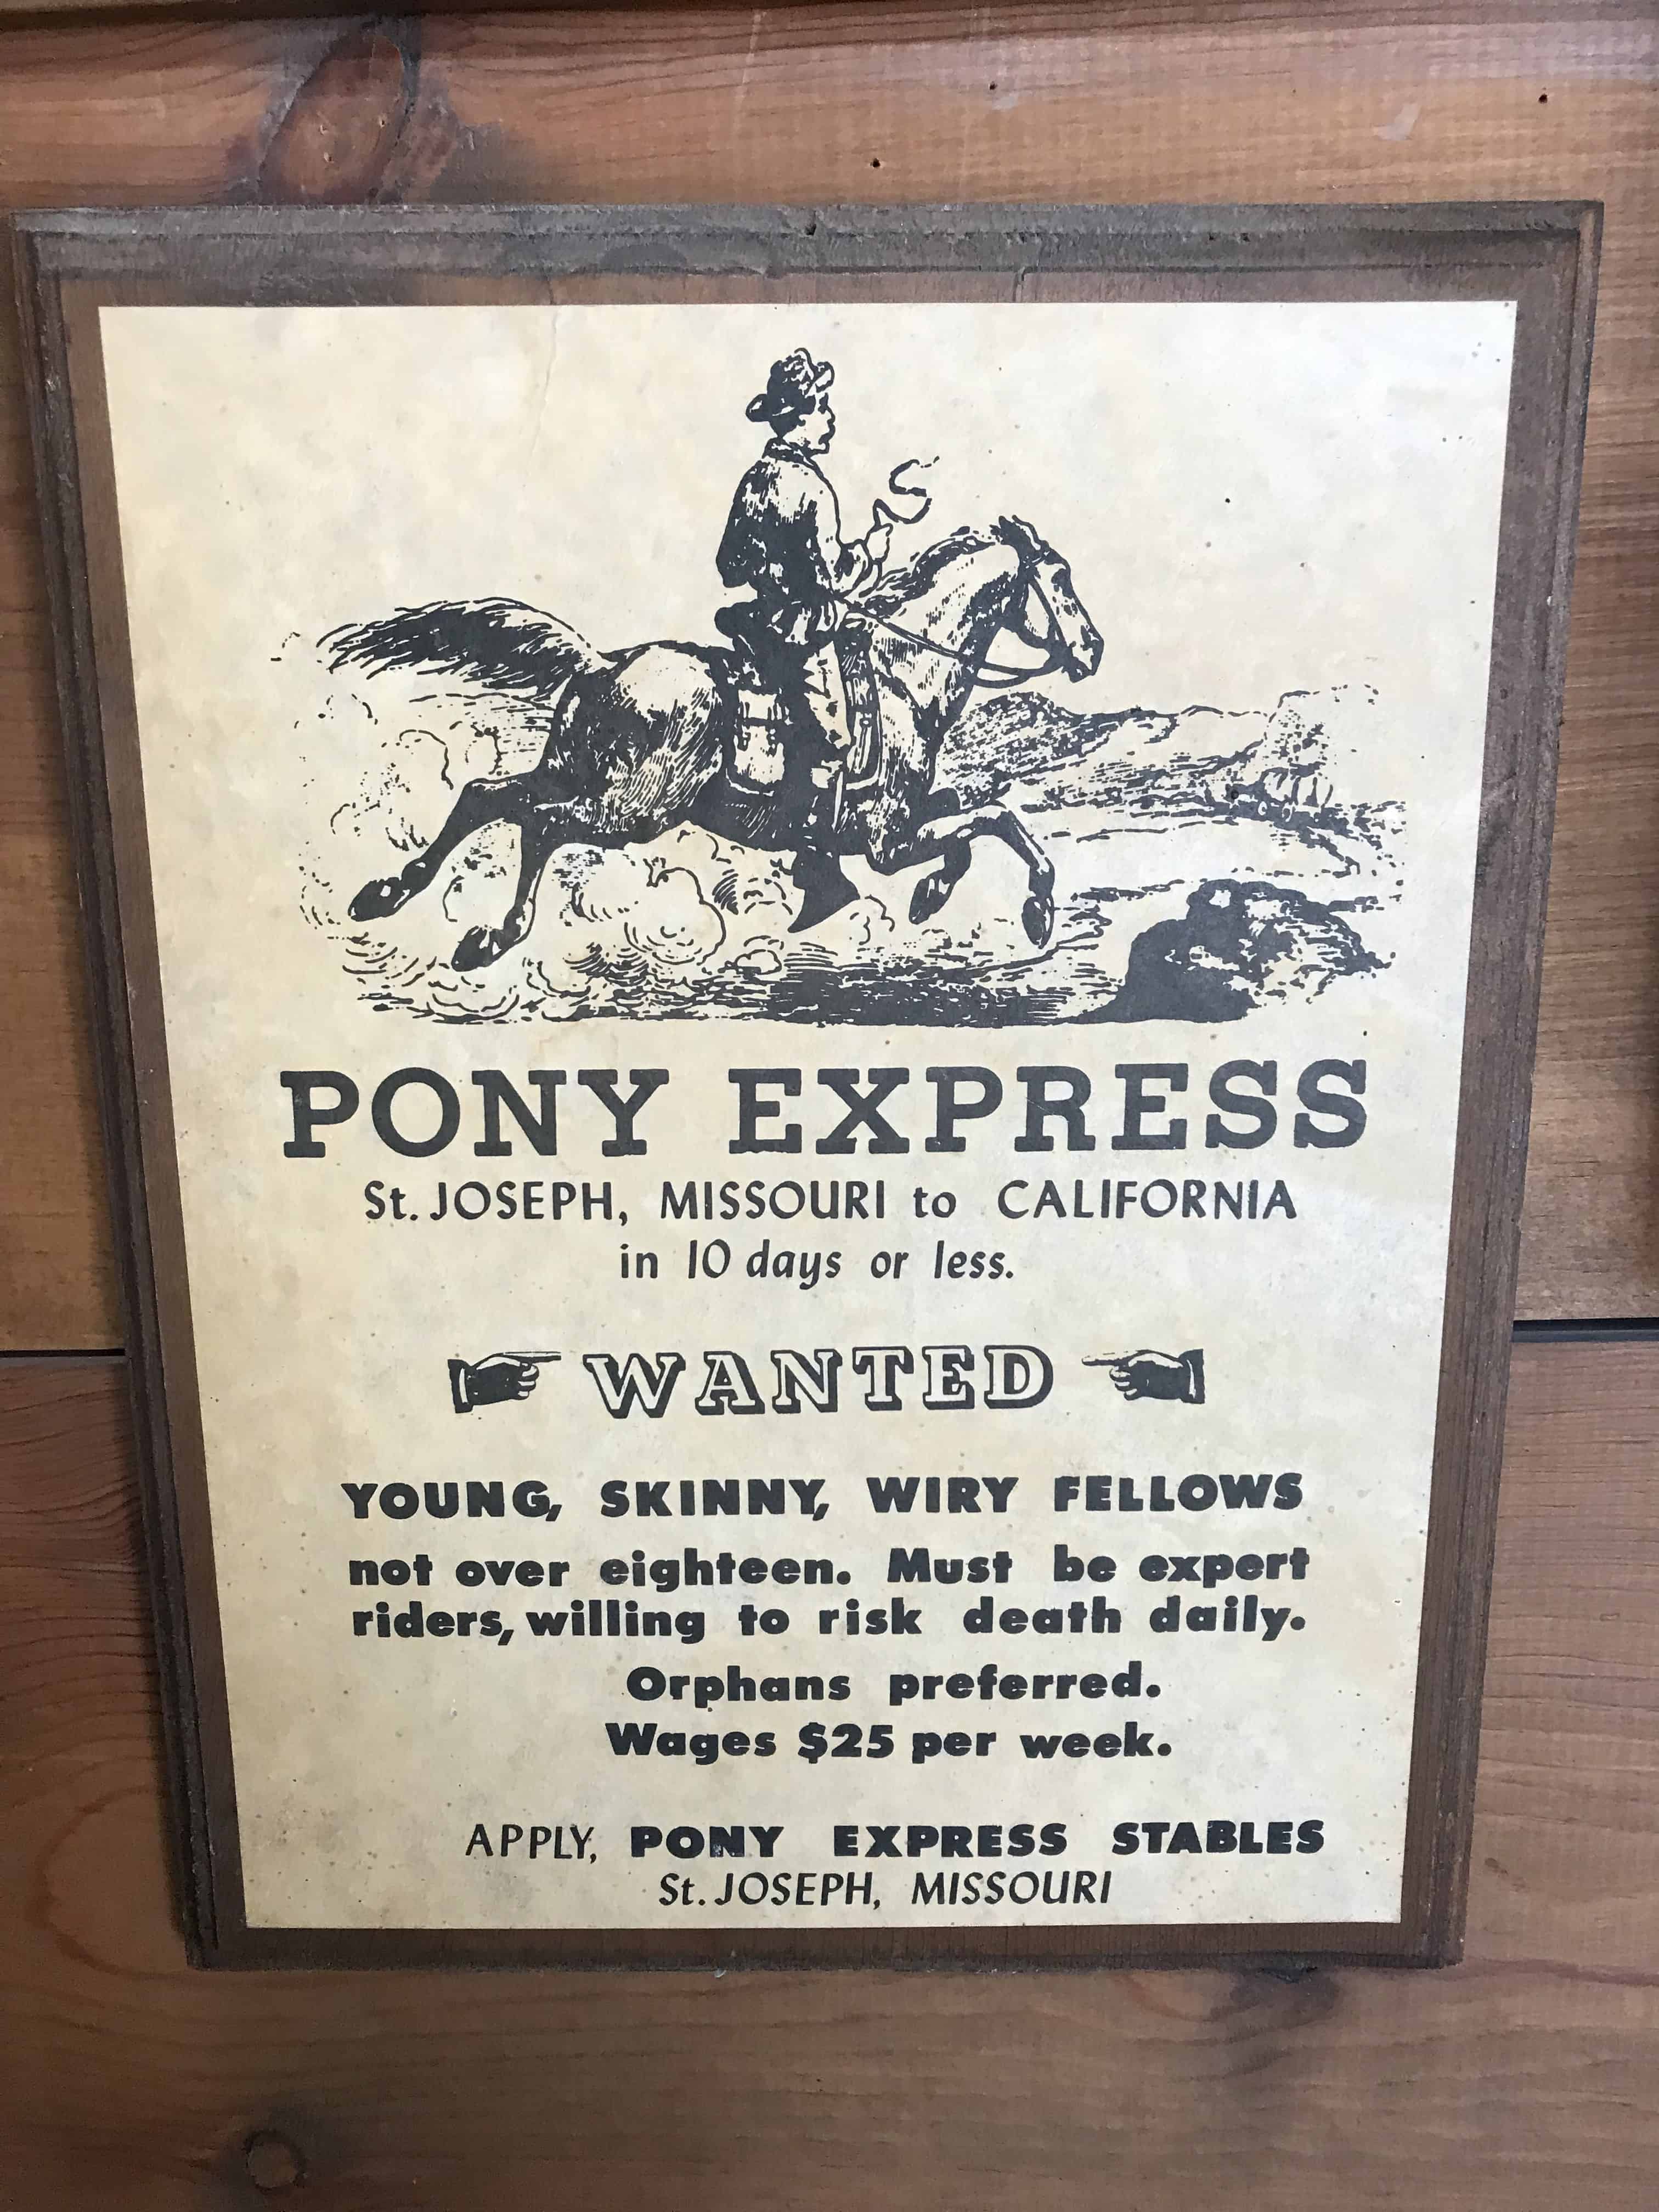 Pony Express advertisement at the Sod House Museum.